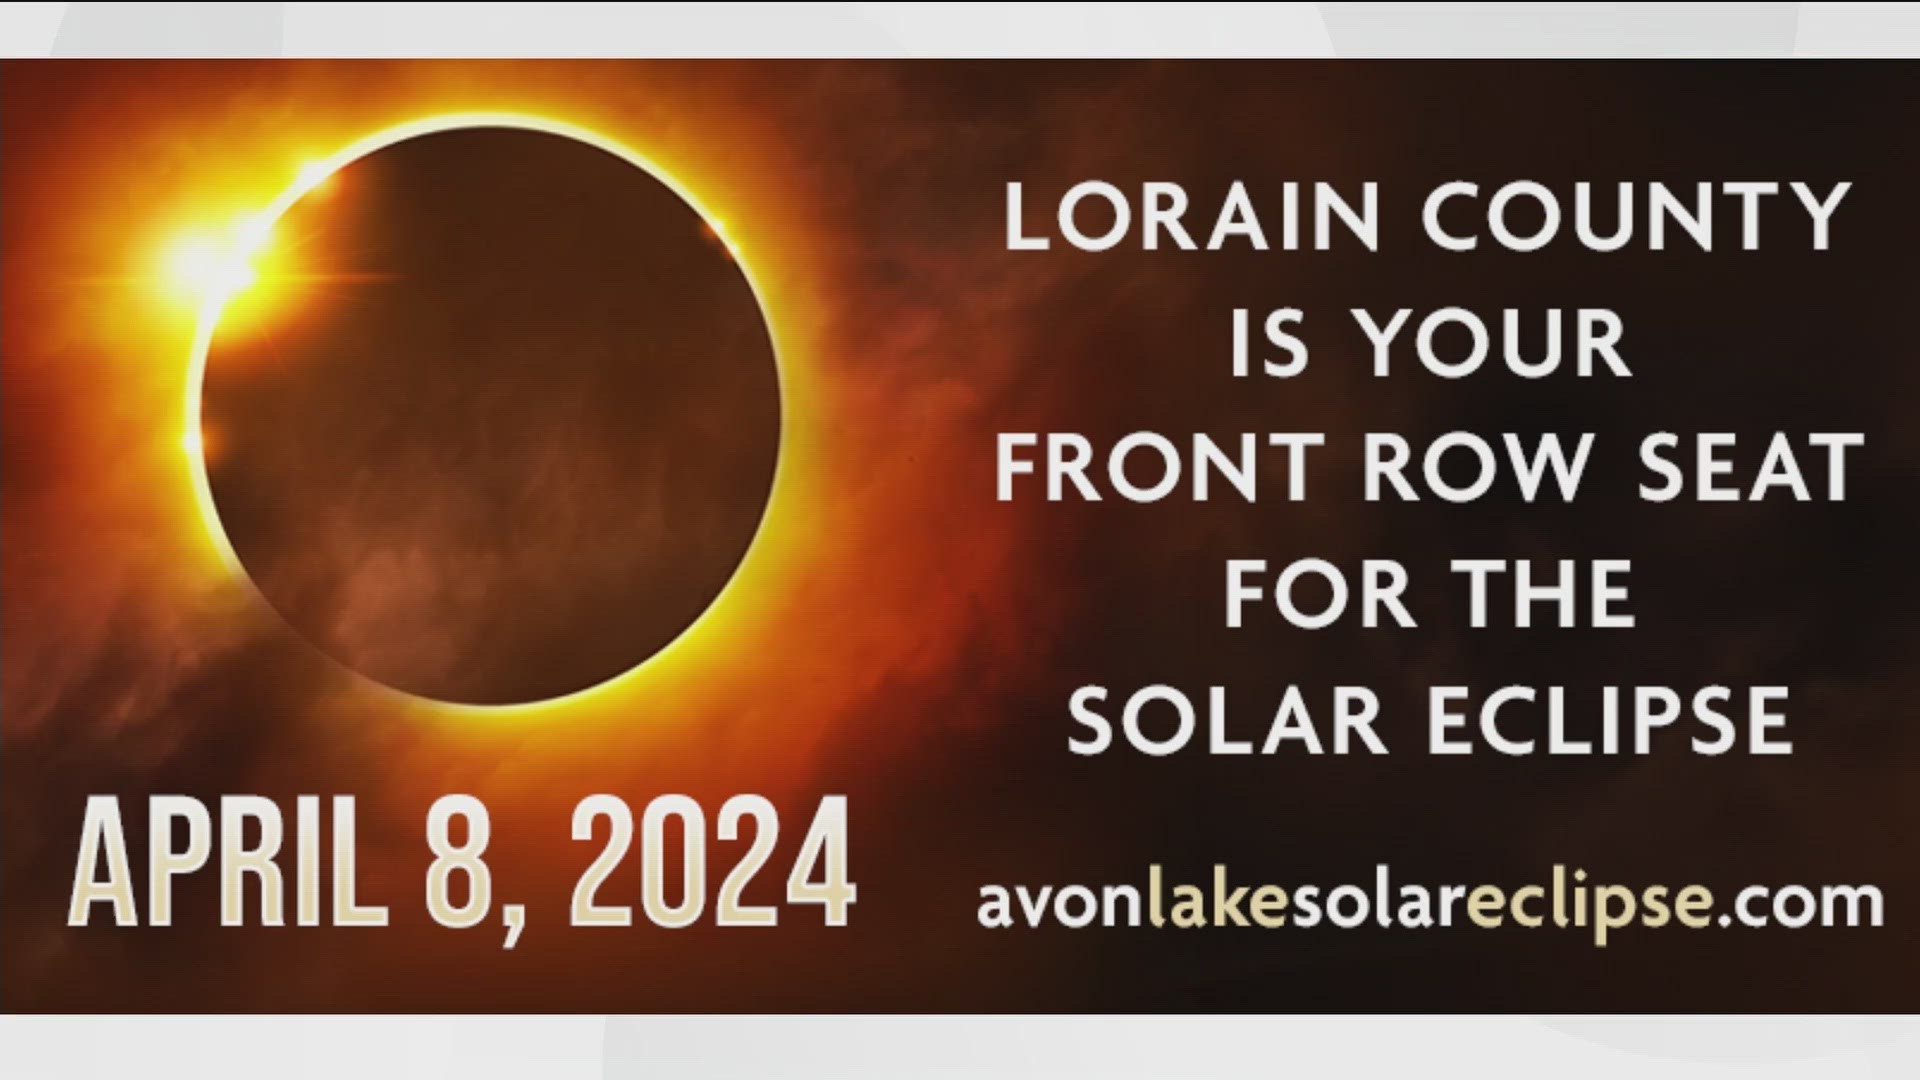 Joe talks with Erin Fach about the place with the most total darkness during the April 8th solar eclipse!